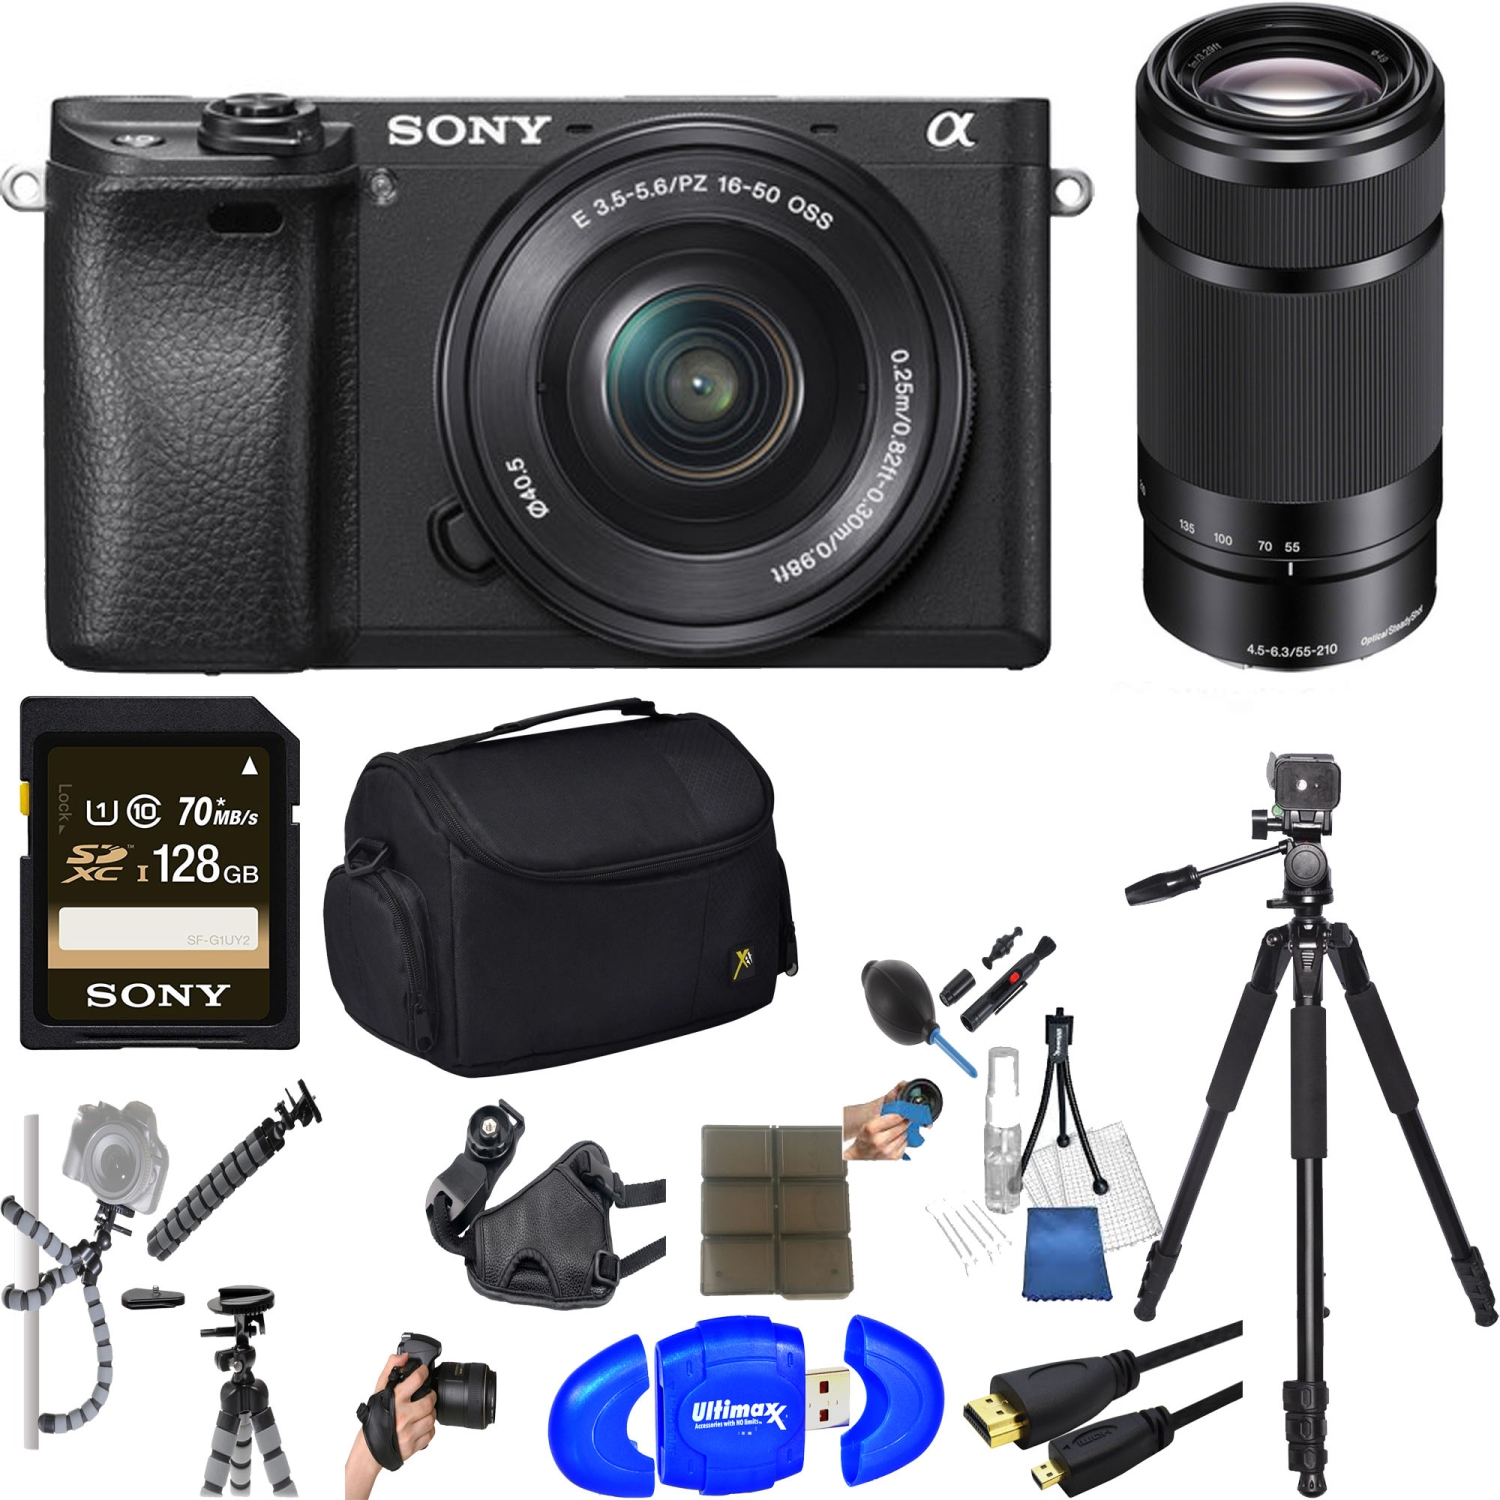 Sony Alpha a6300 Digital Camera with 16-50mm & 55-210mm Lens & Additional Accessories - US Version w/ Seller Warranty